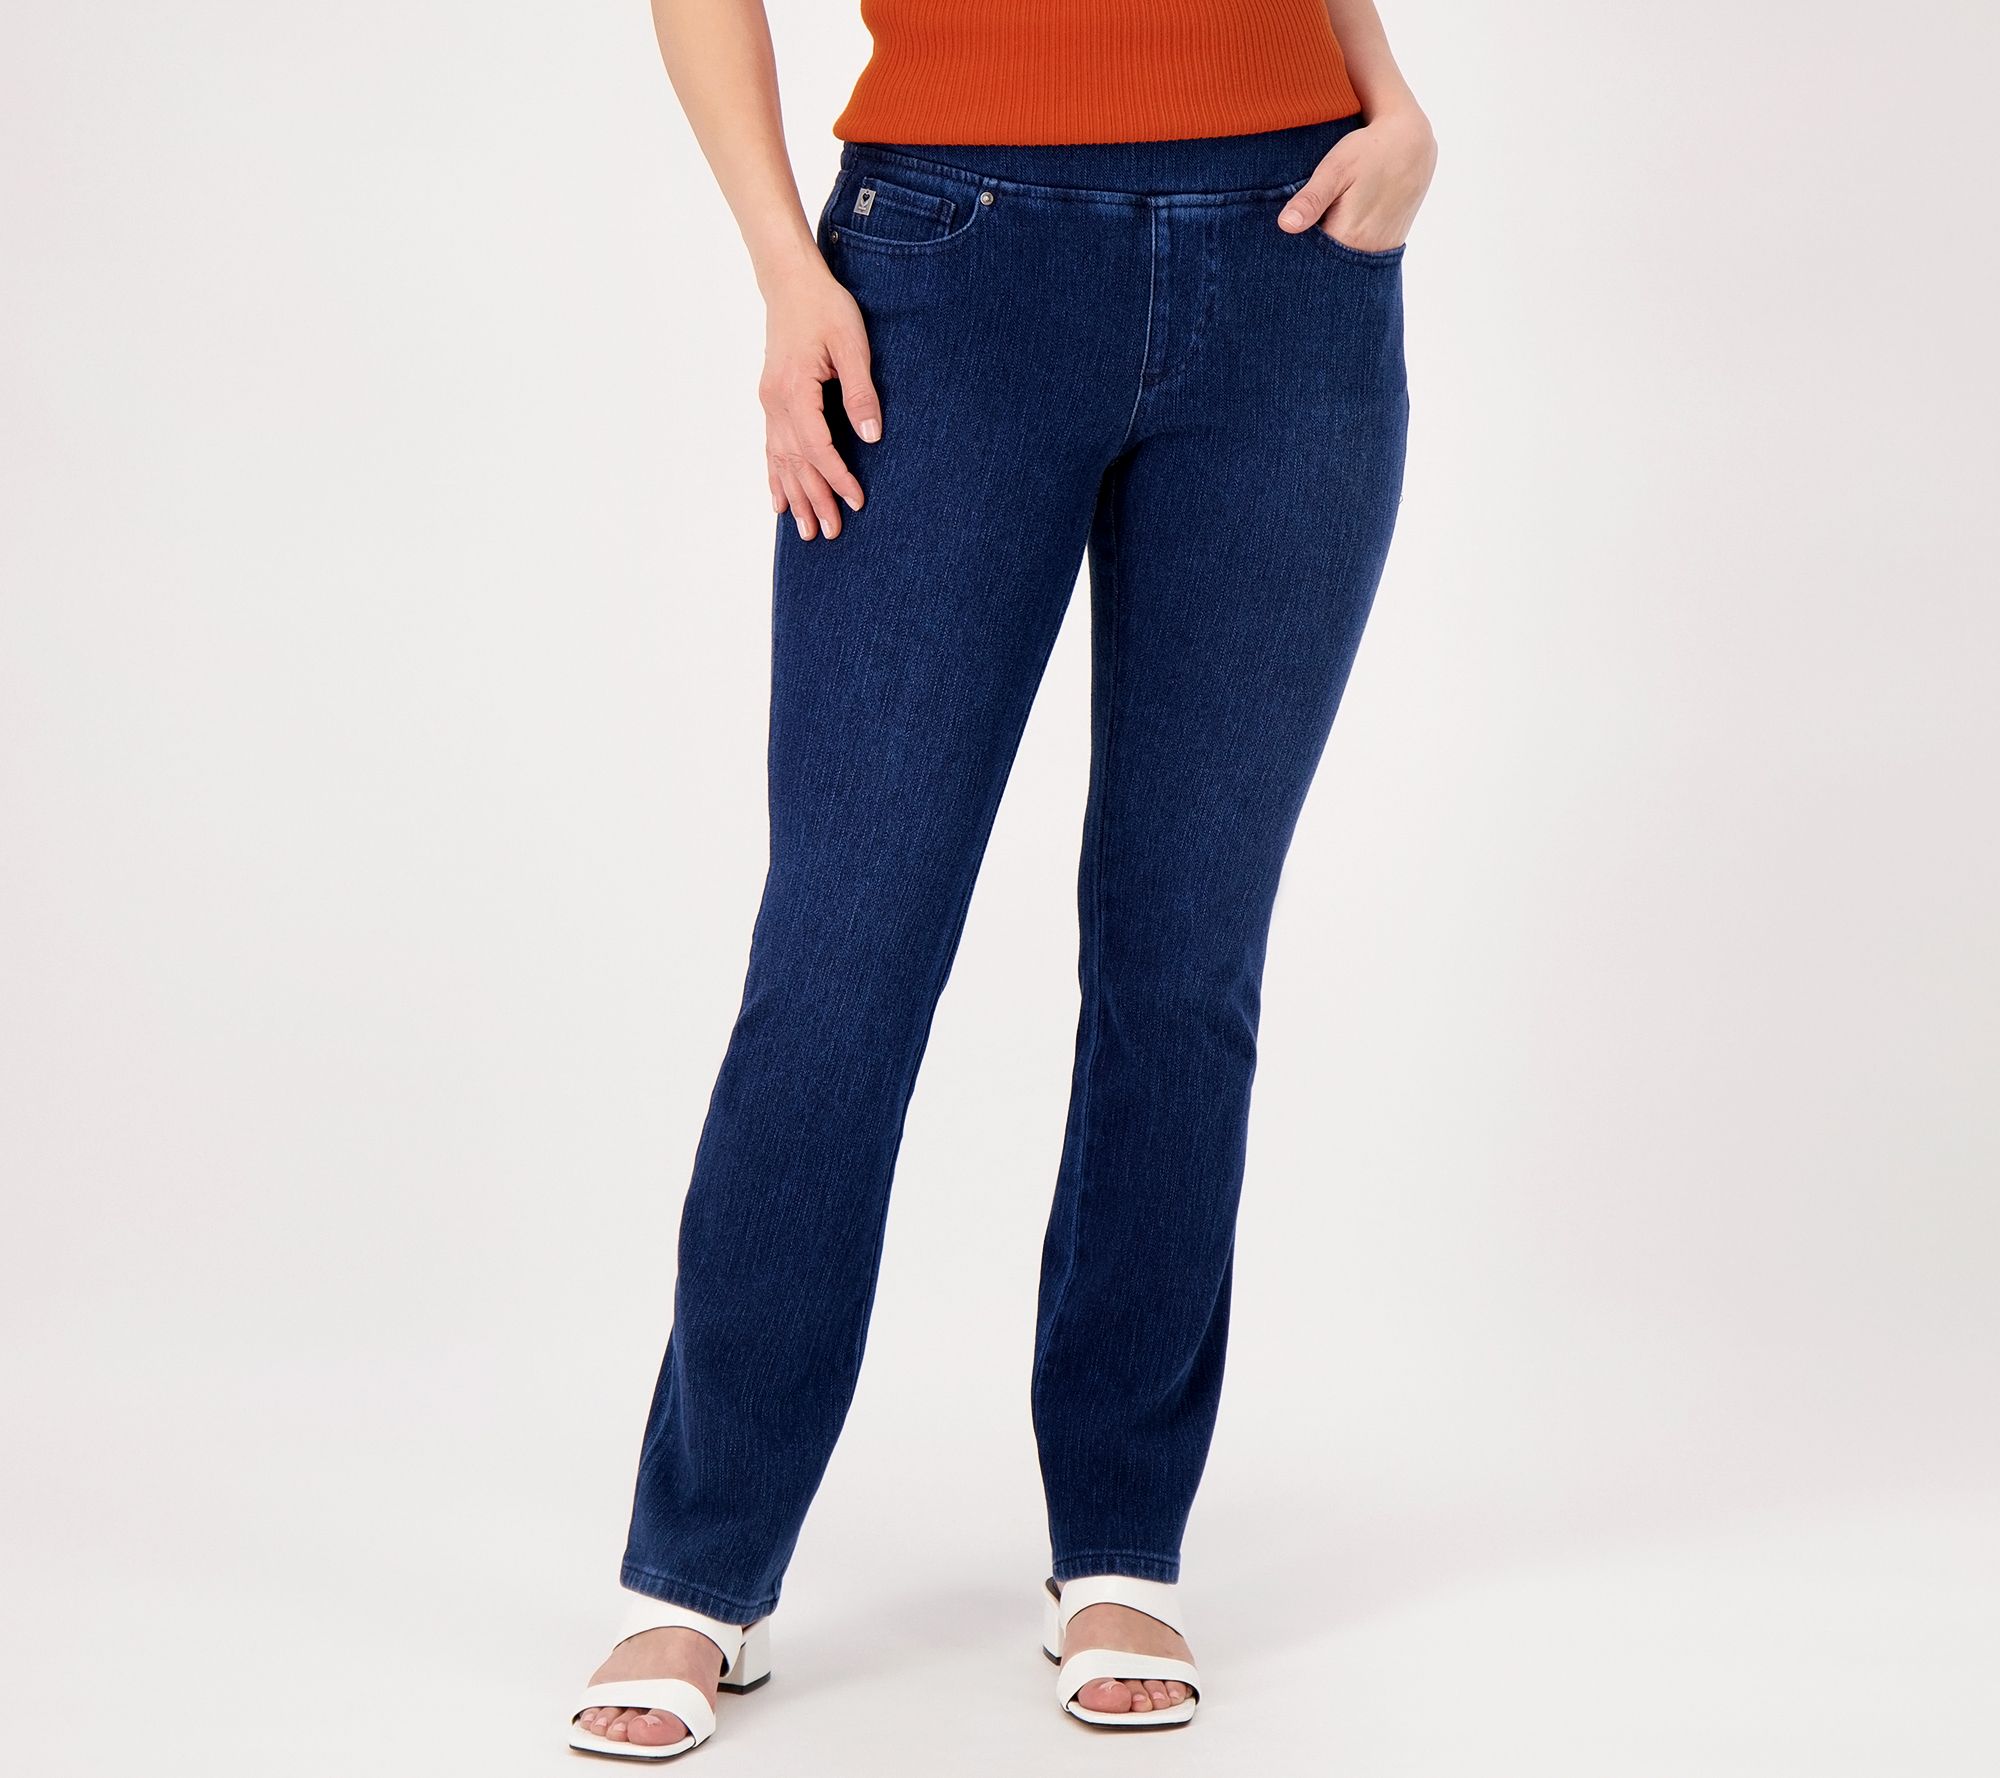 Knit Denim Pull-On Bootcut Jeans - Coldwater Creek